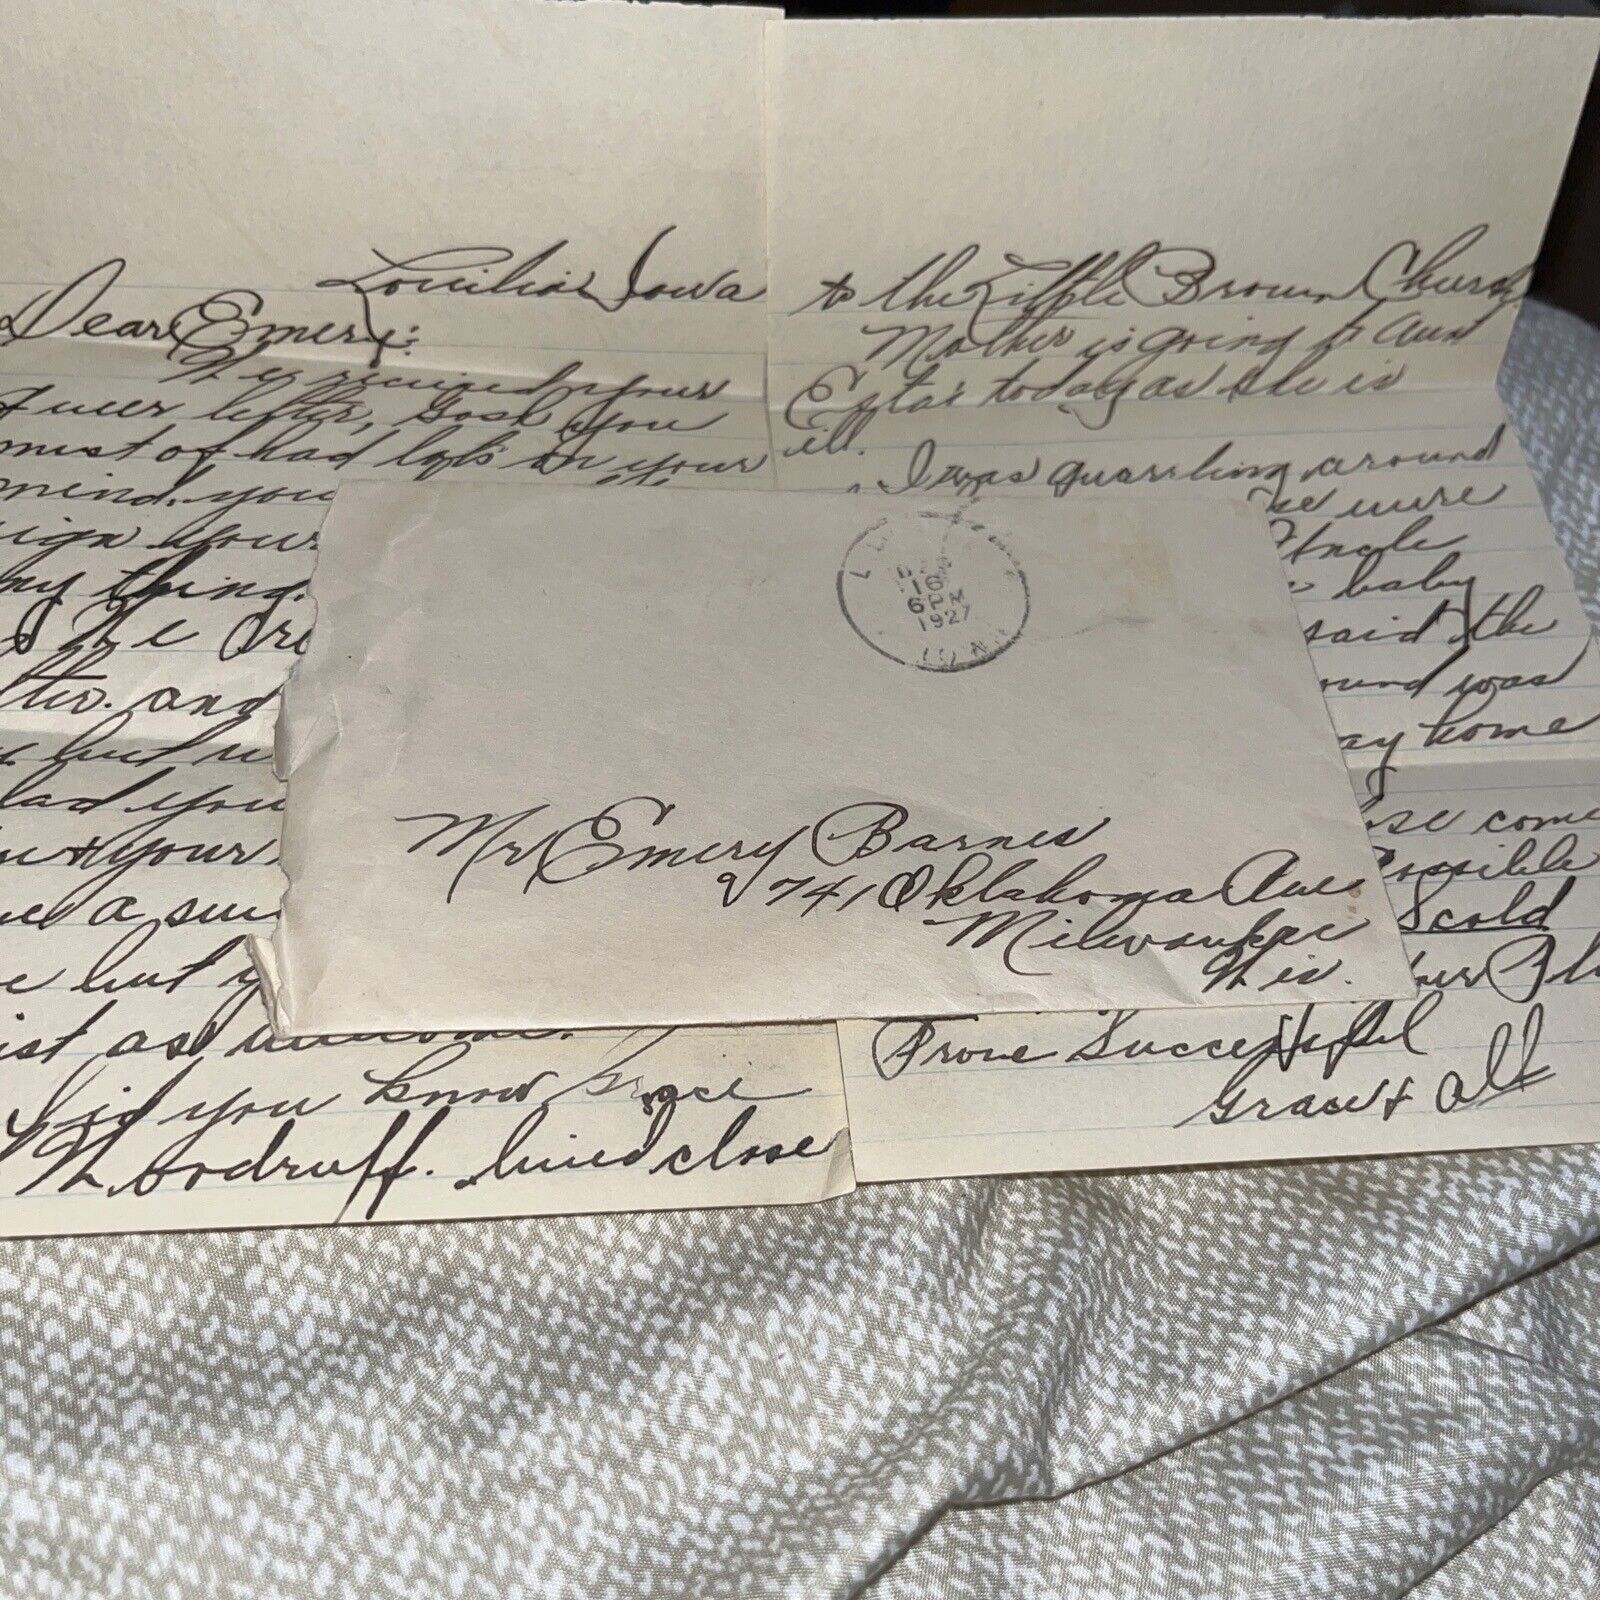 Antique 1927 Letter from Lovilia Iowa IA Mentions Little Brown Church (Nashua?)